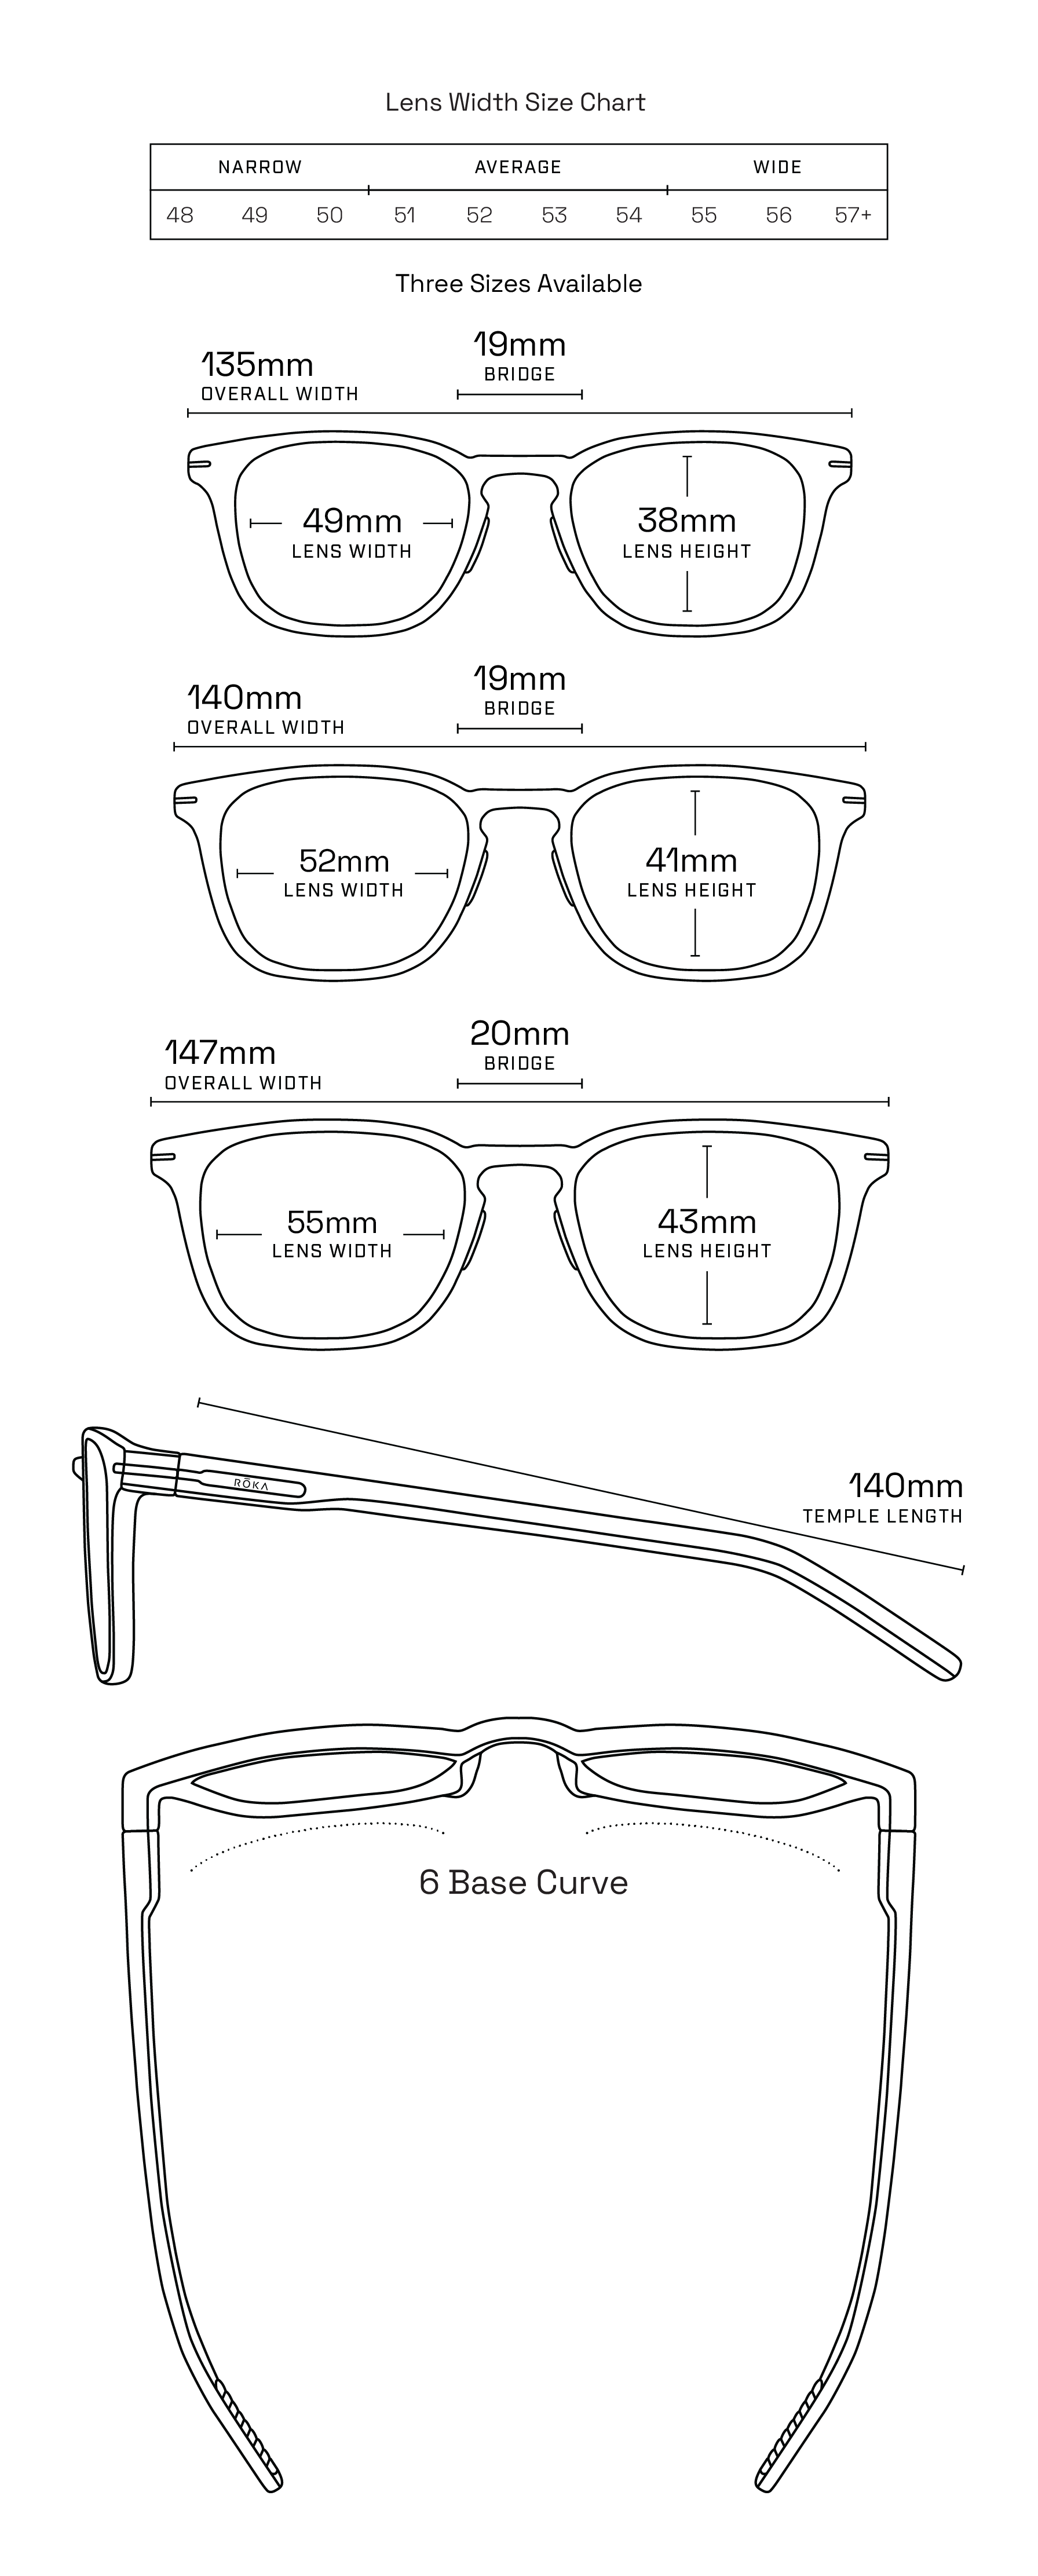 Would your vision become worse if you wear large-sized glasses often?